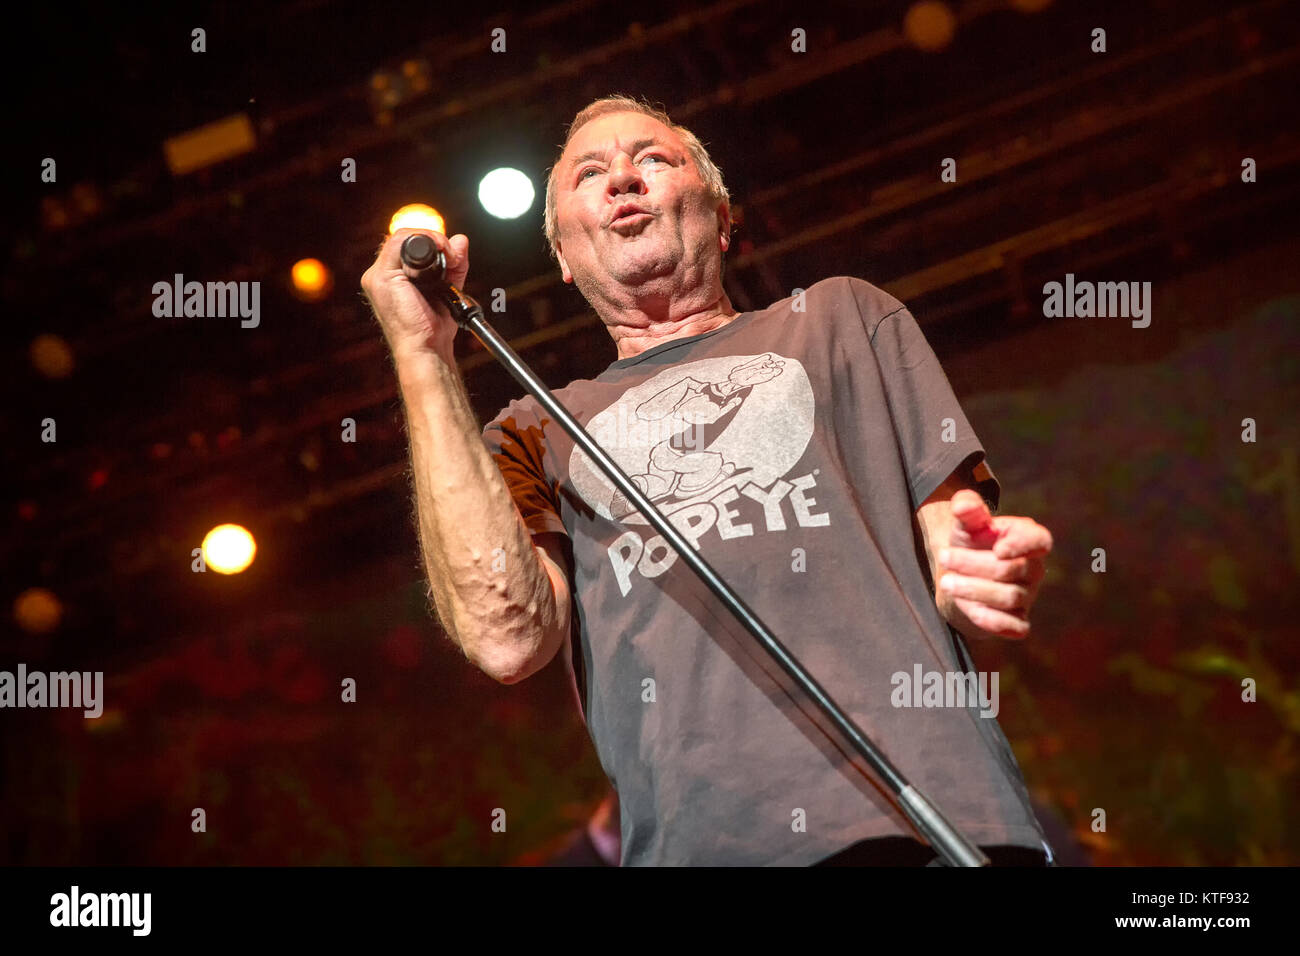 Norway, Oslo - November 9, 2017. The English rock band Deep Purple performs a live concert at Oslo Spektrum. Here vocalist and songwriter Ian Gillan is seen live on stage. (Photo credit: Gonzales Photo - Terje Dokken). Stock Photo